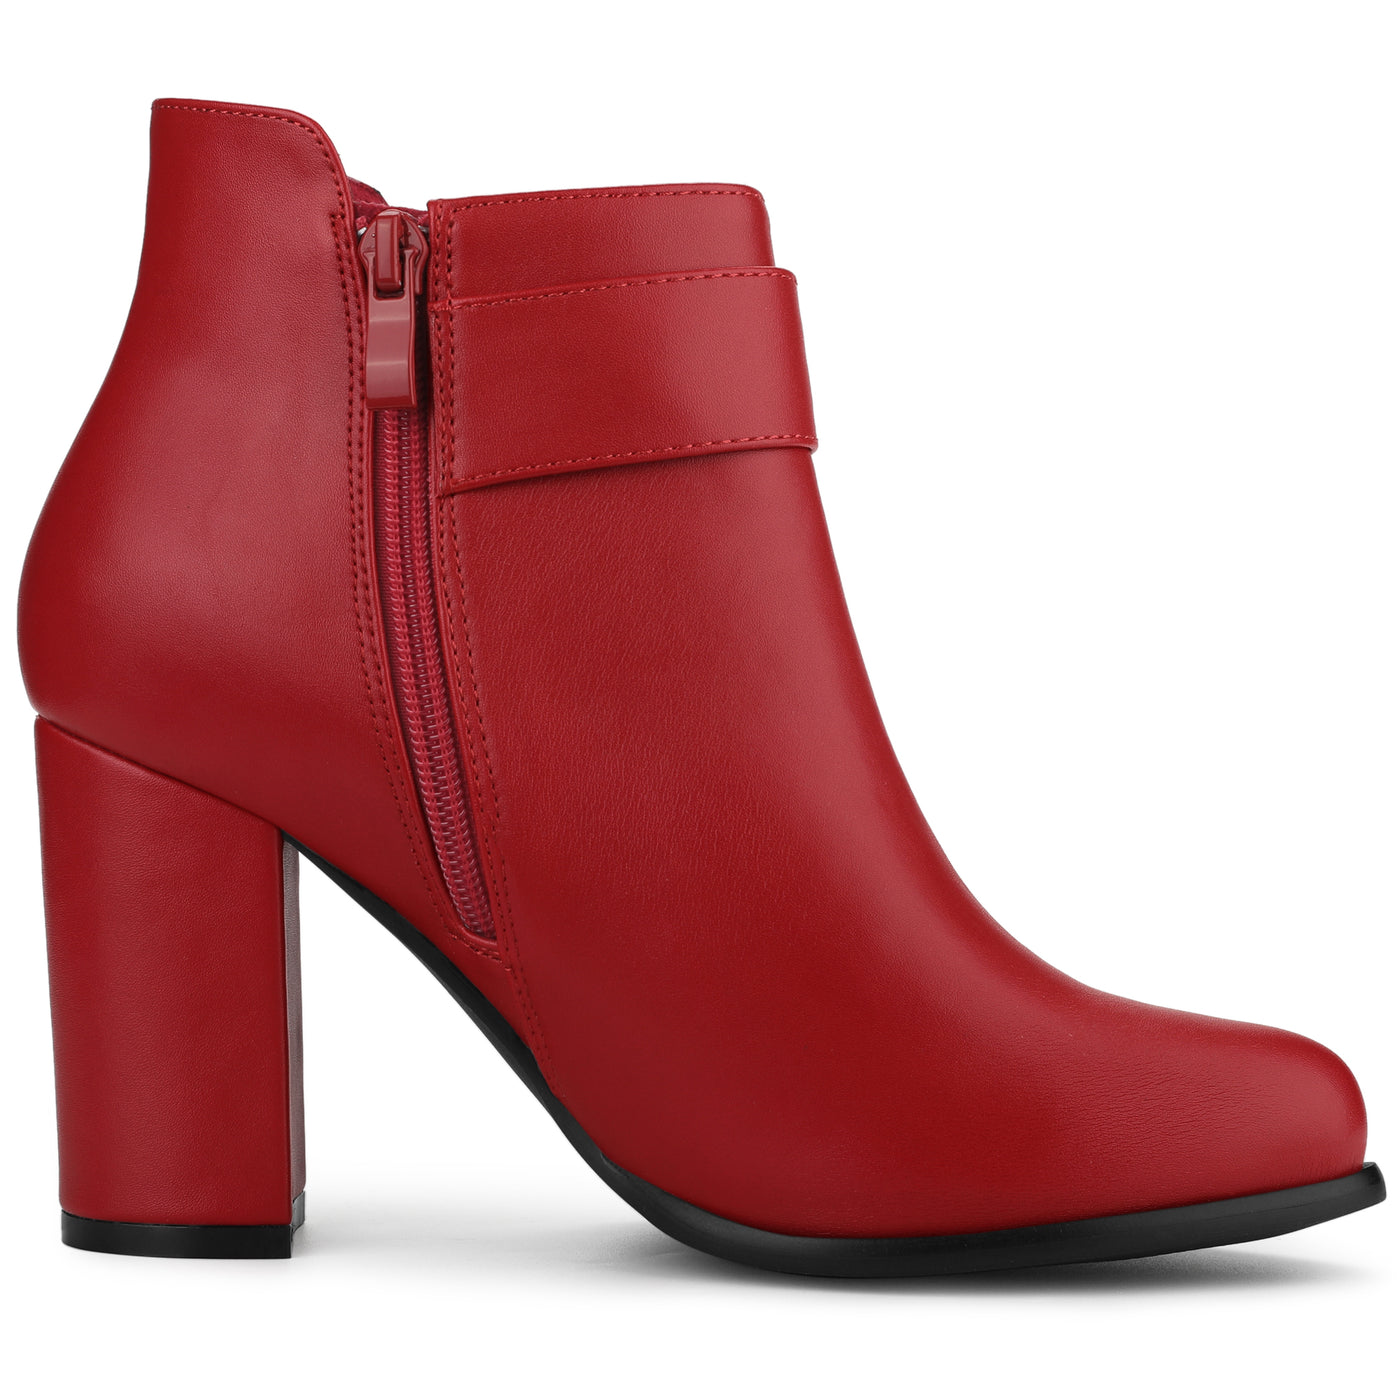 Allegra K Round Toe Circle Buckle Chunky Heel Ankle Boots